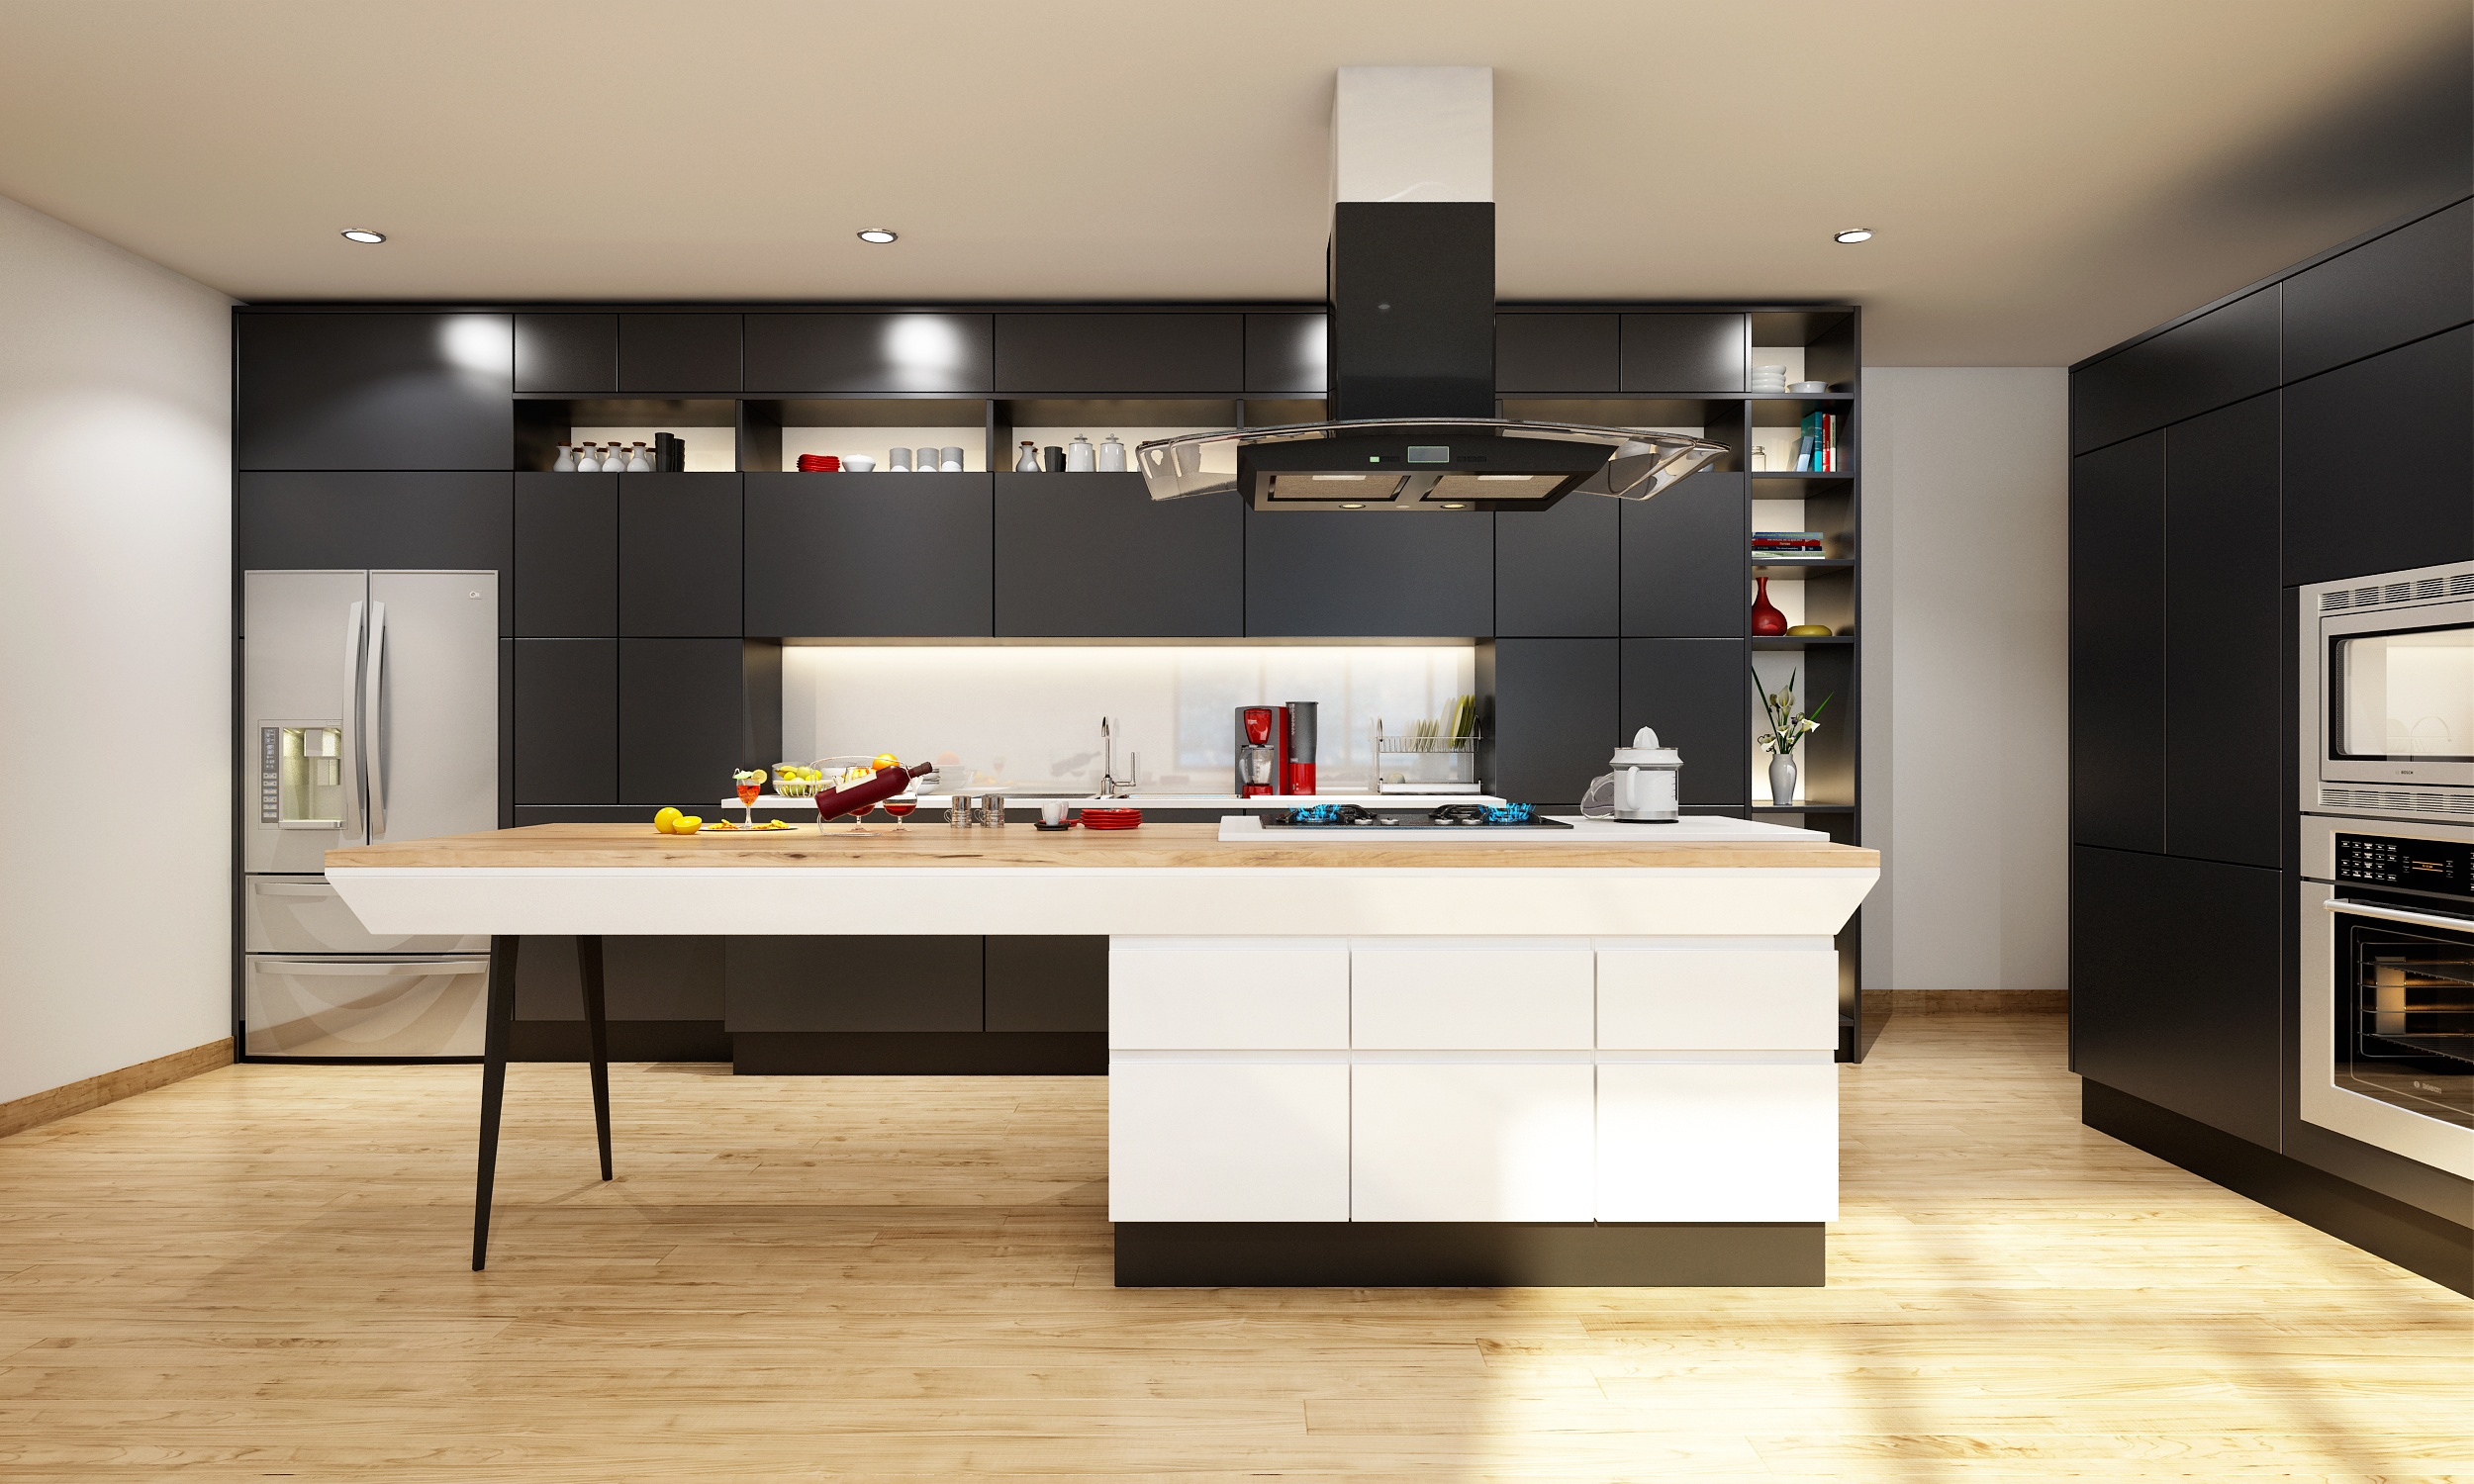 An Introduction to Island Modular Kitchen and its Variants